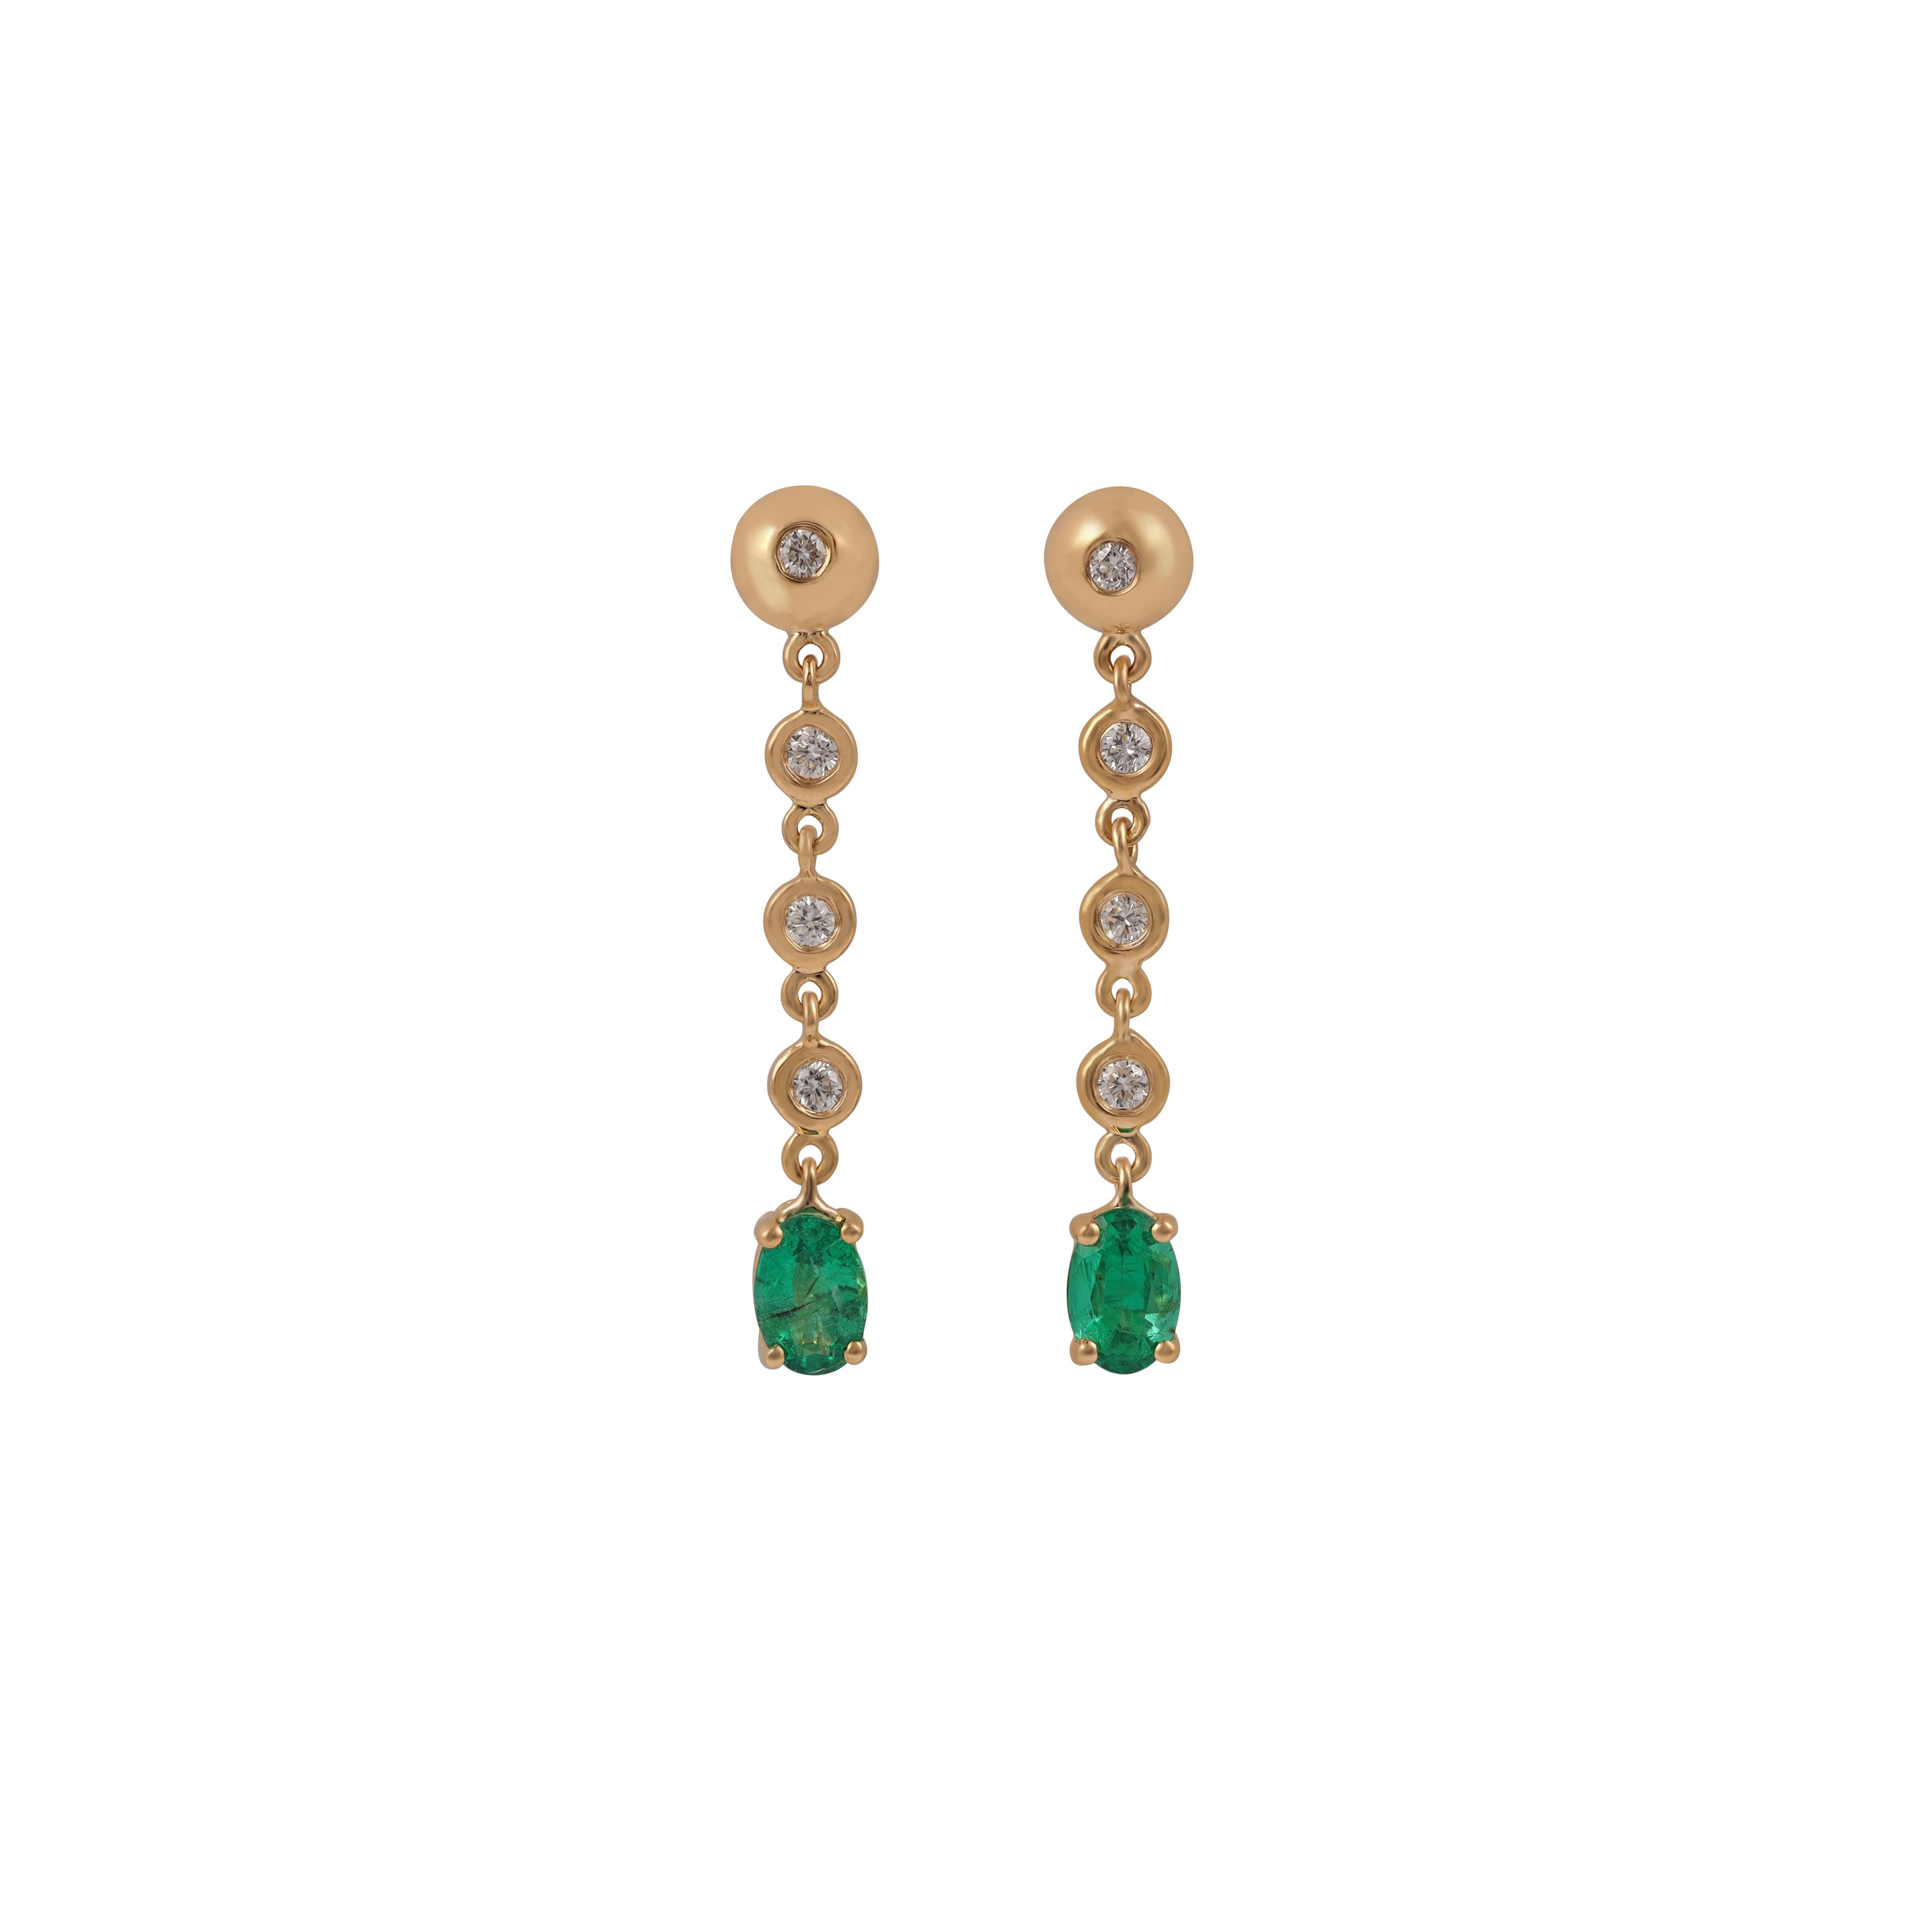 18K Gold long drop earrings with 8 round brilliant-cut diamonds 0.19 carats total weight, two oval shaped emeralds 0.95 carats total weight & Gold 18k 3.02gm.
